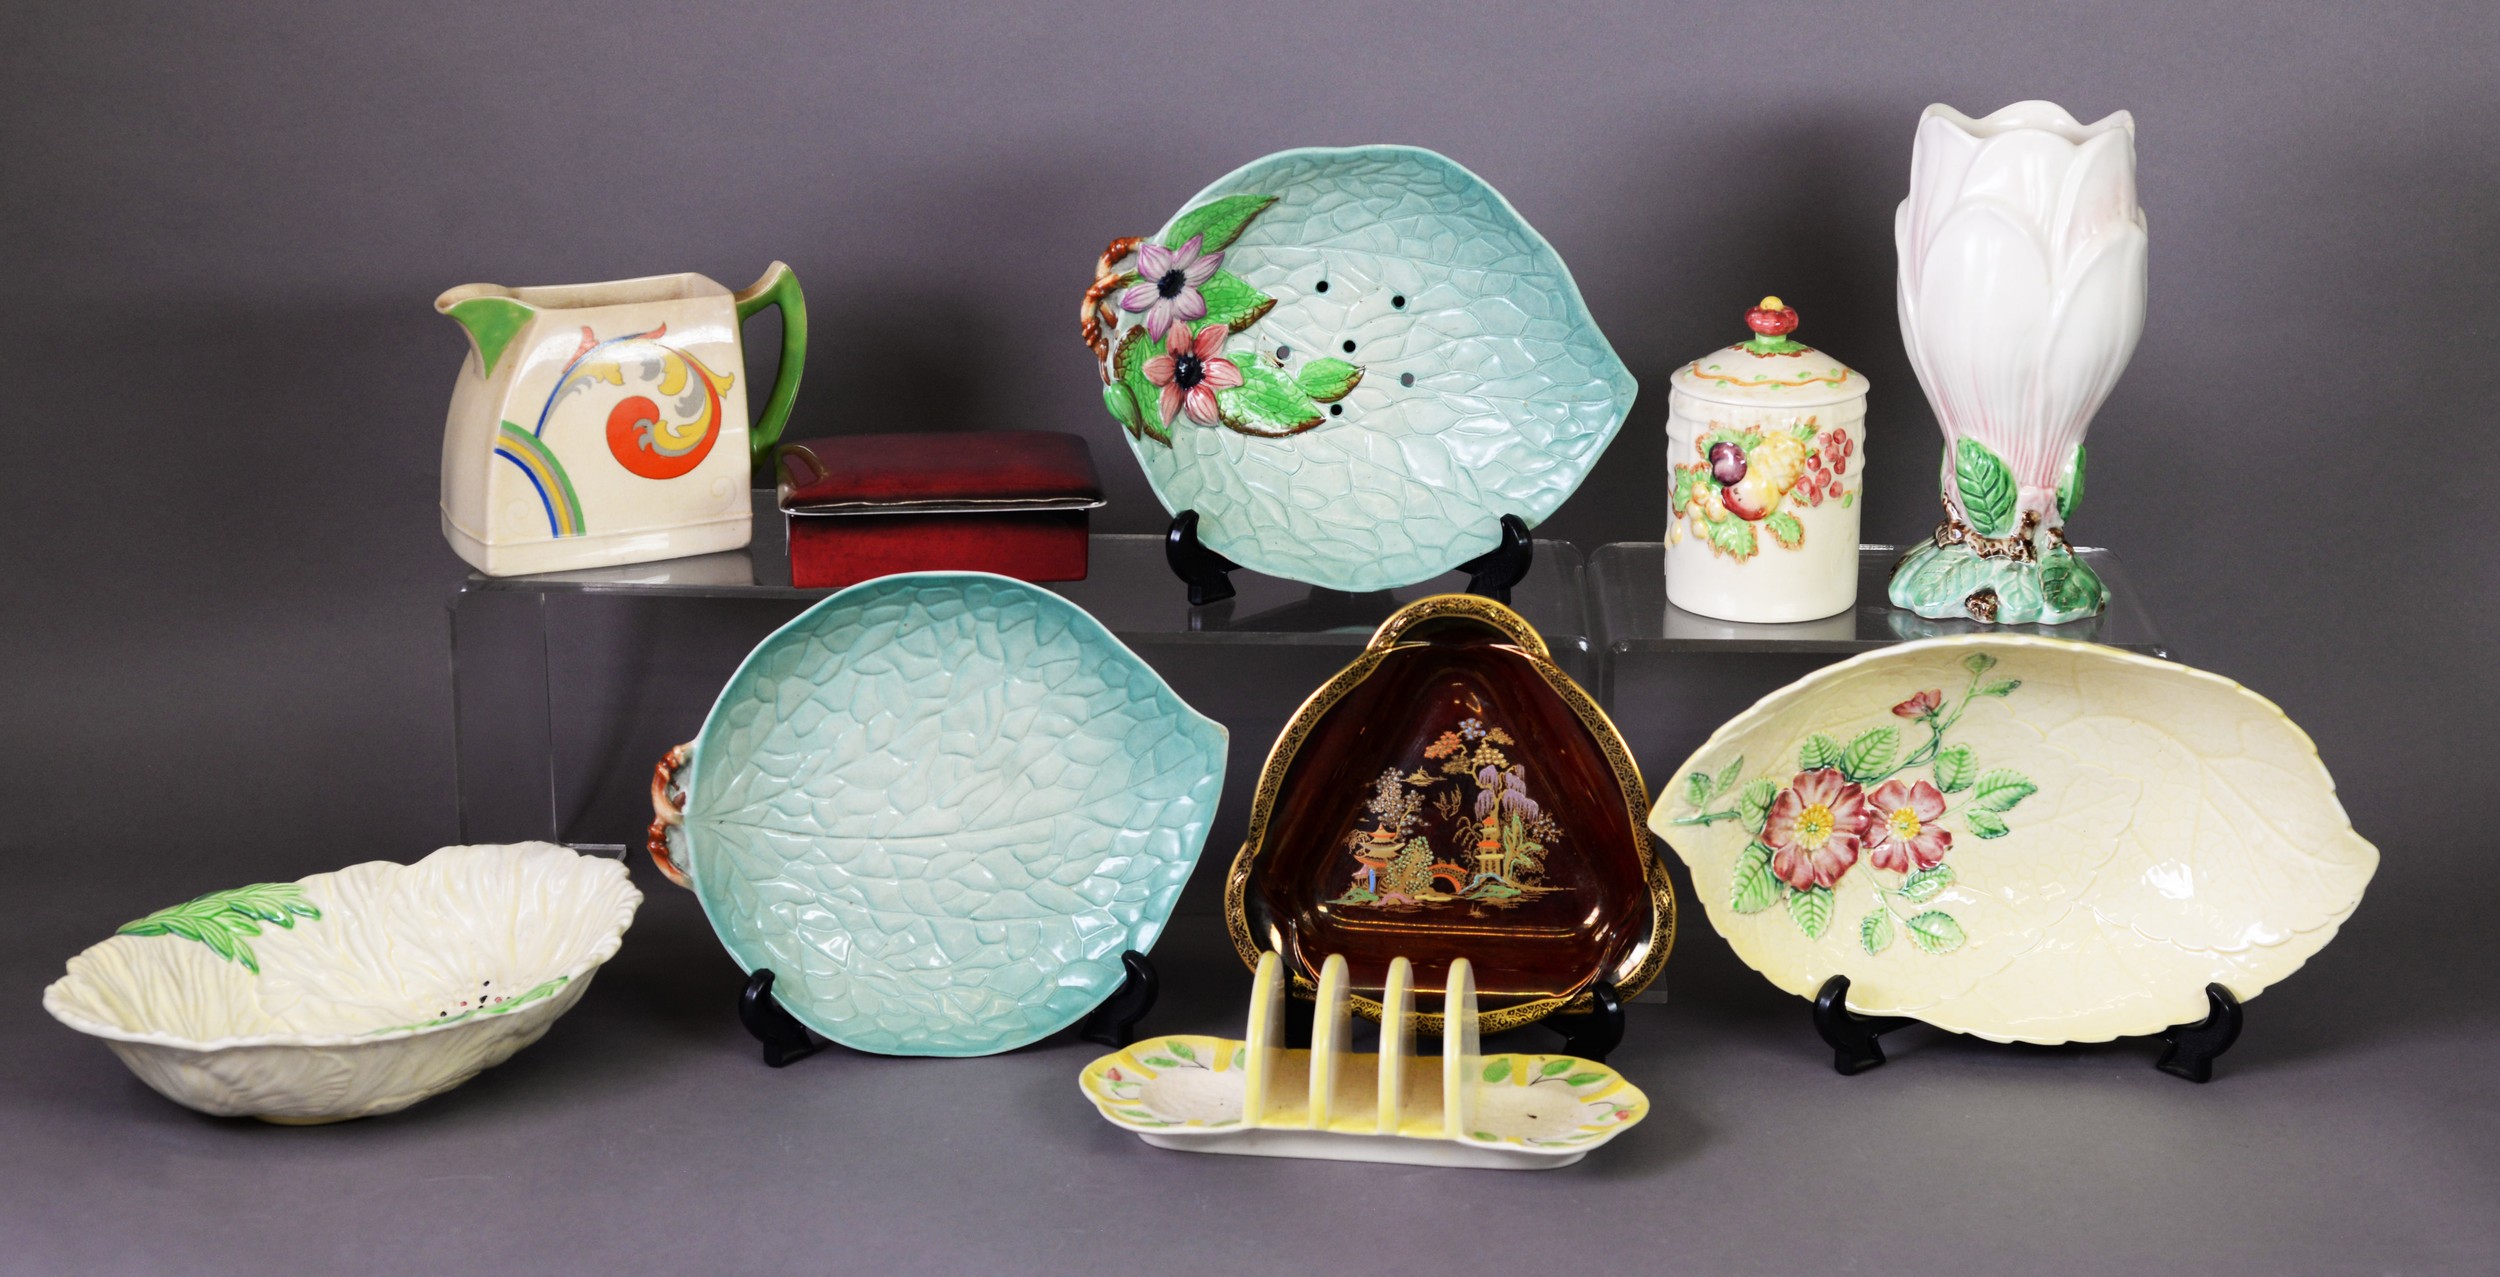 SMALL COLLECTION OF ART DECO AND LATER CERAMICS, including Carlton Ware Australian stamp